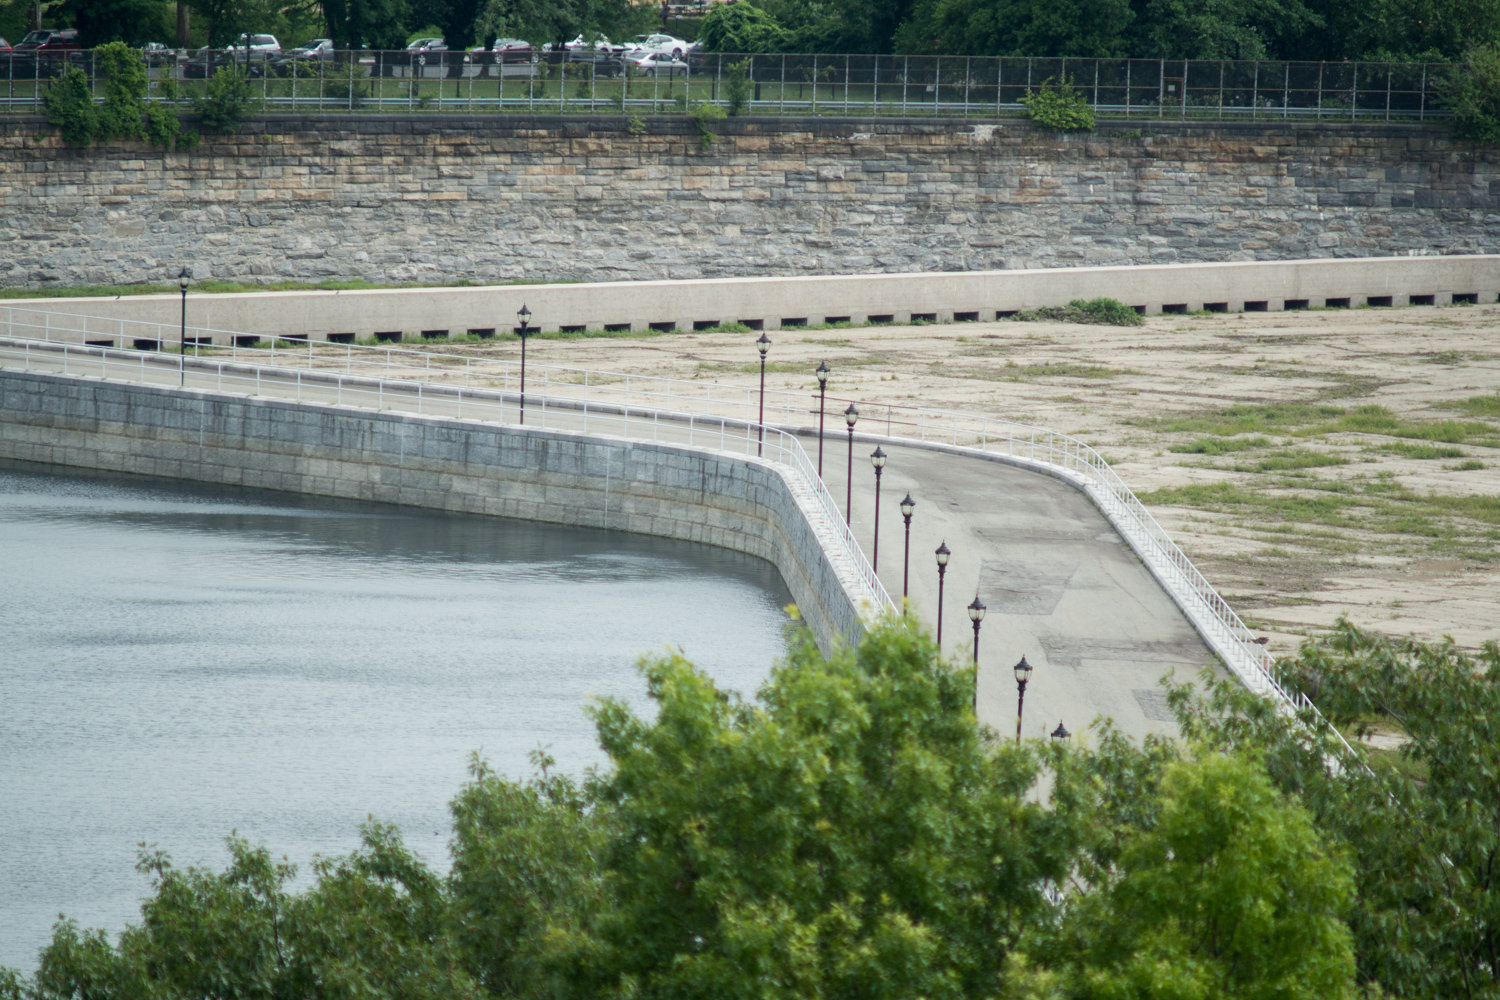 When work on the Jerome Park Reservoir’s south basin is completed, both basins will be full. This might seem like an obvious result, but actually marks a reversal by the city’s environmental protection department, which  had initially planned to keep the north basin empty.